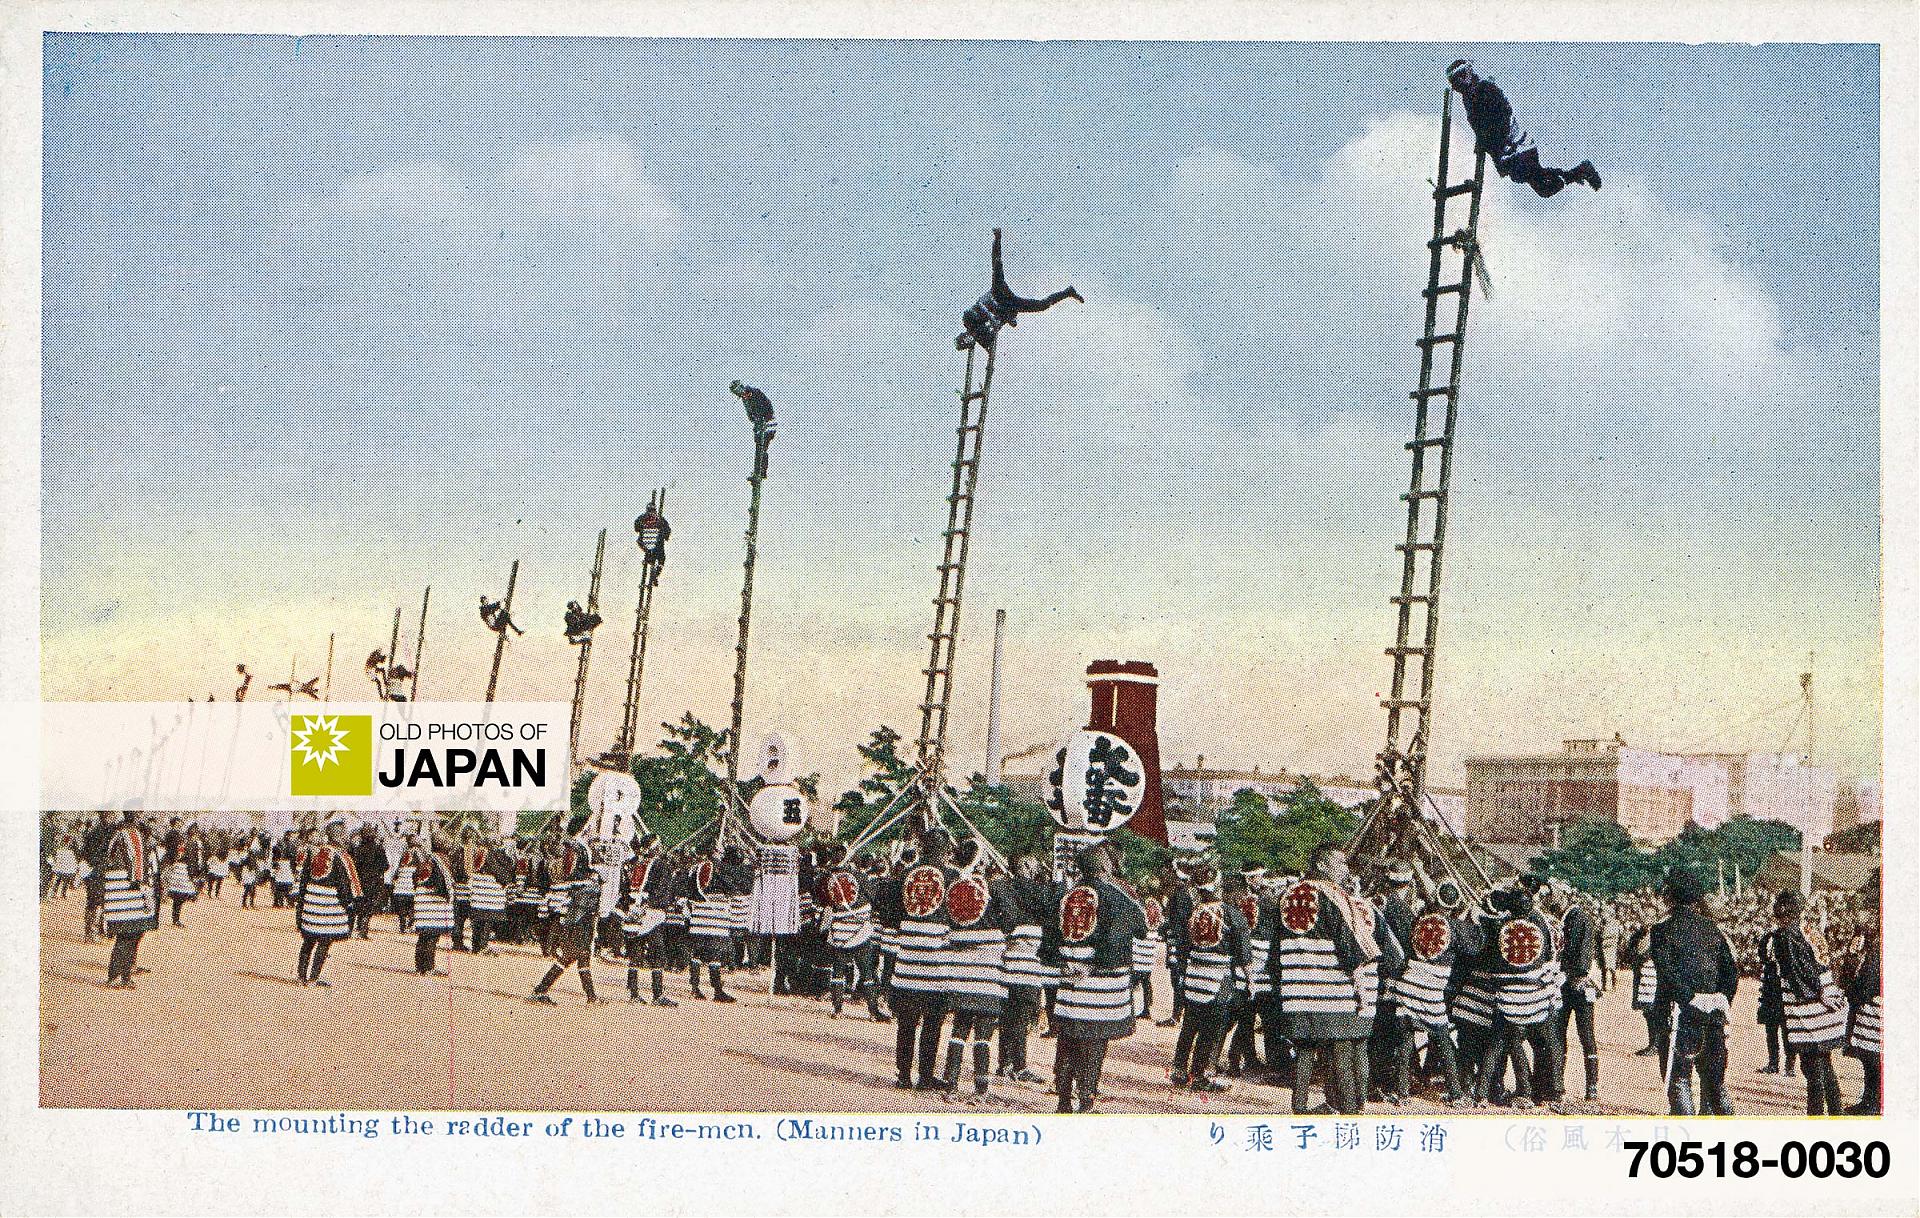 70518-0030 - Japanese Firefighters, 1920s